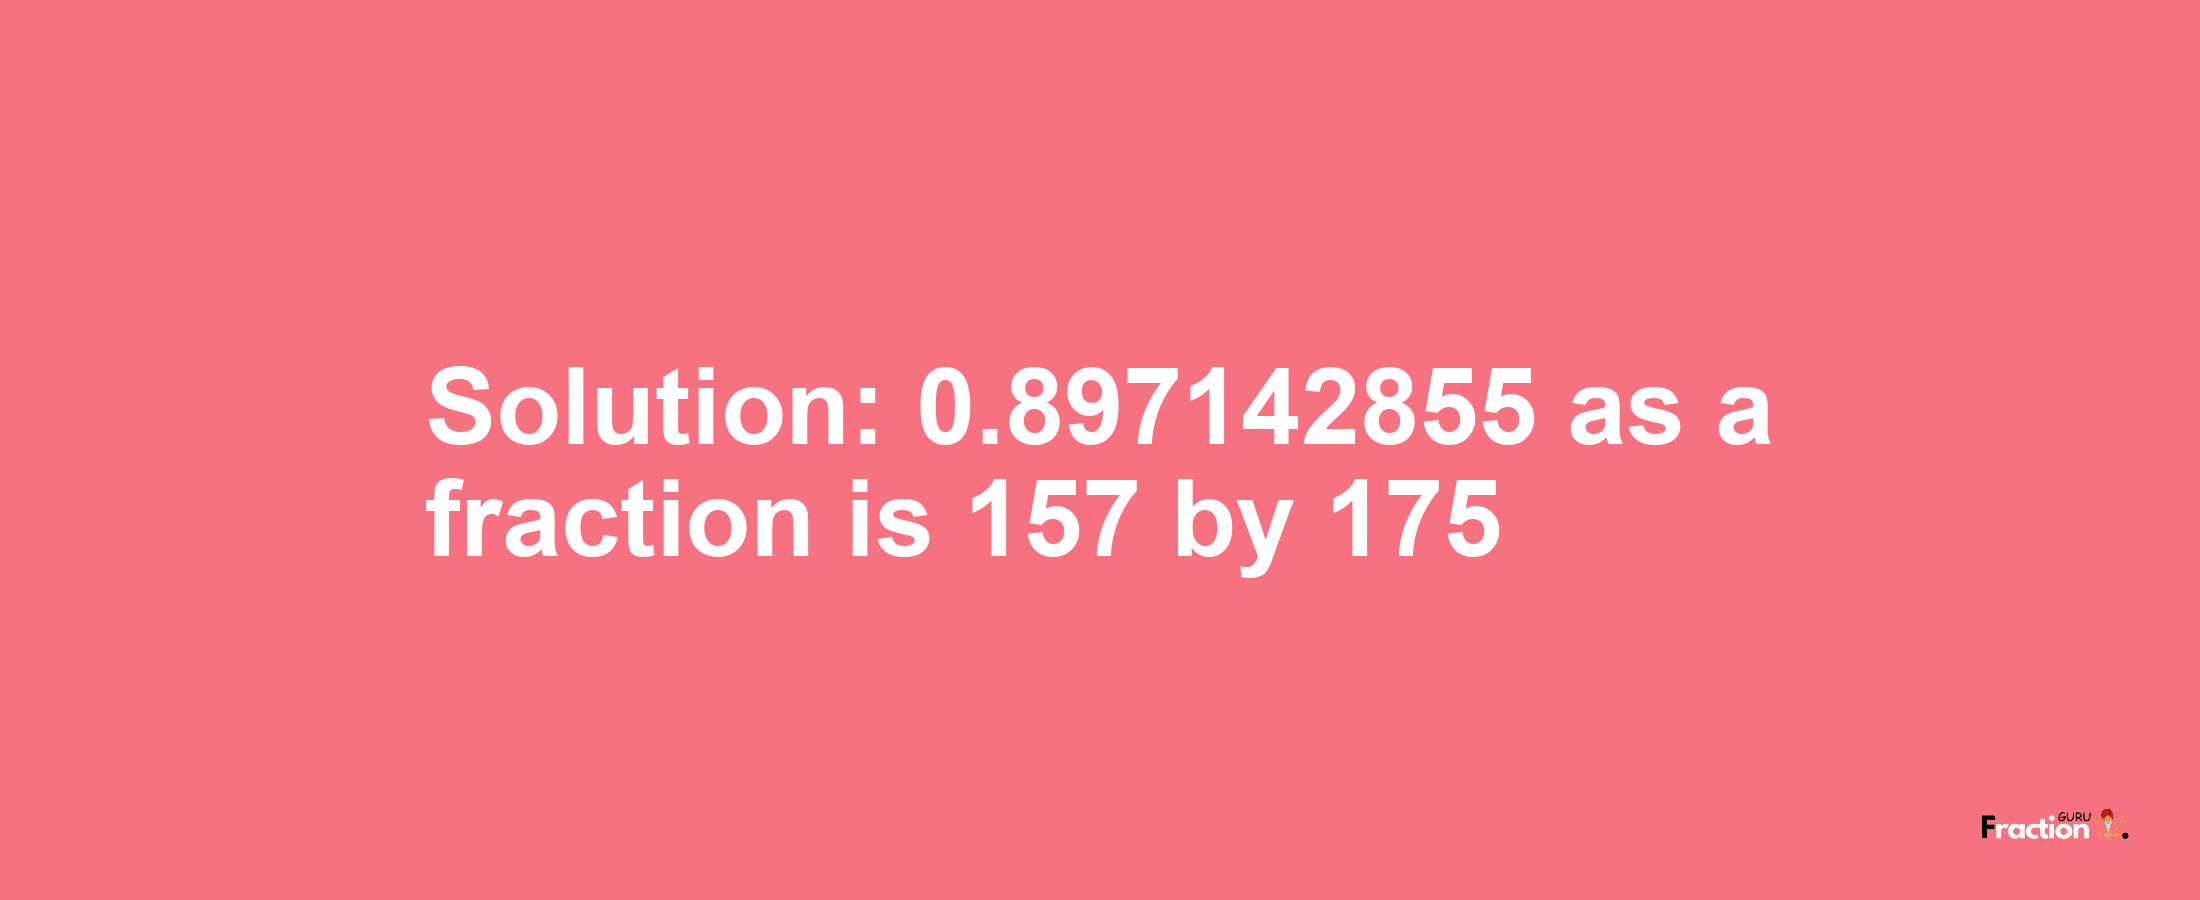 Solution:0.897142855 as a fraction is 157/175